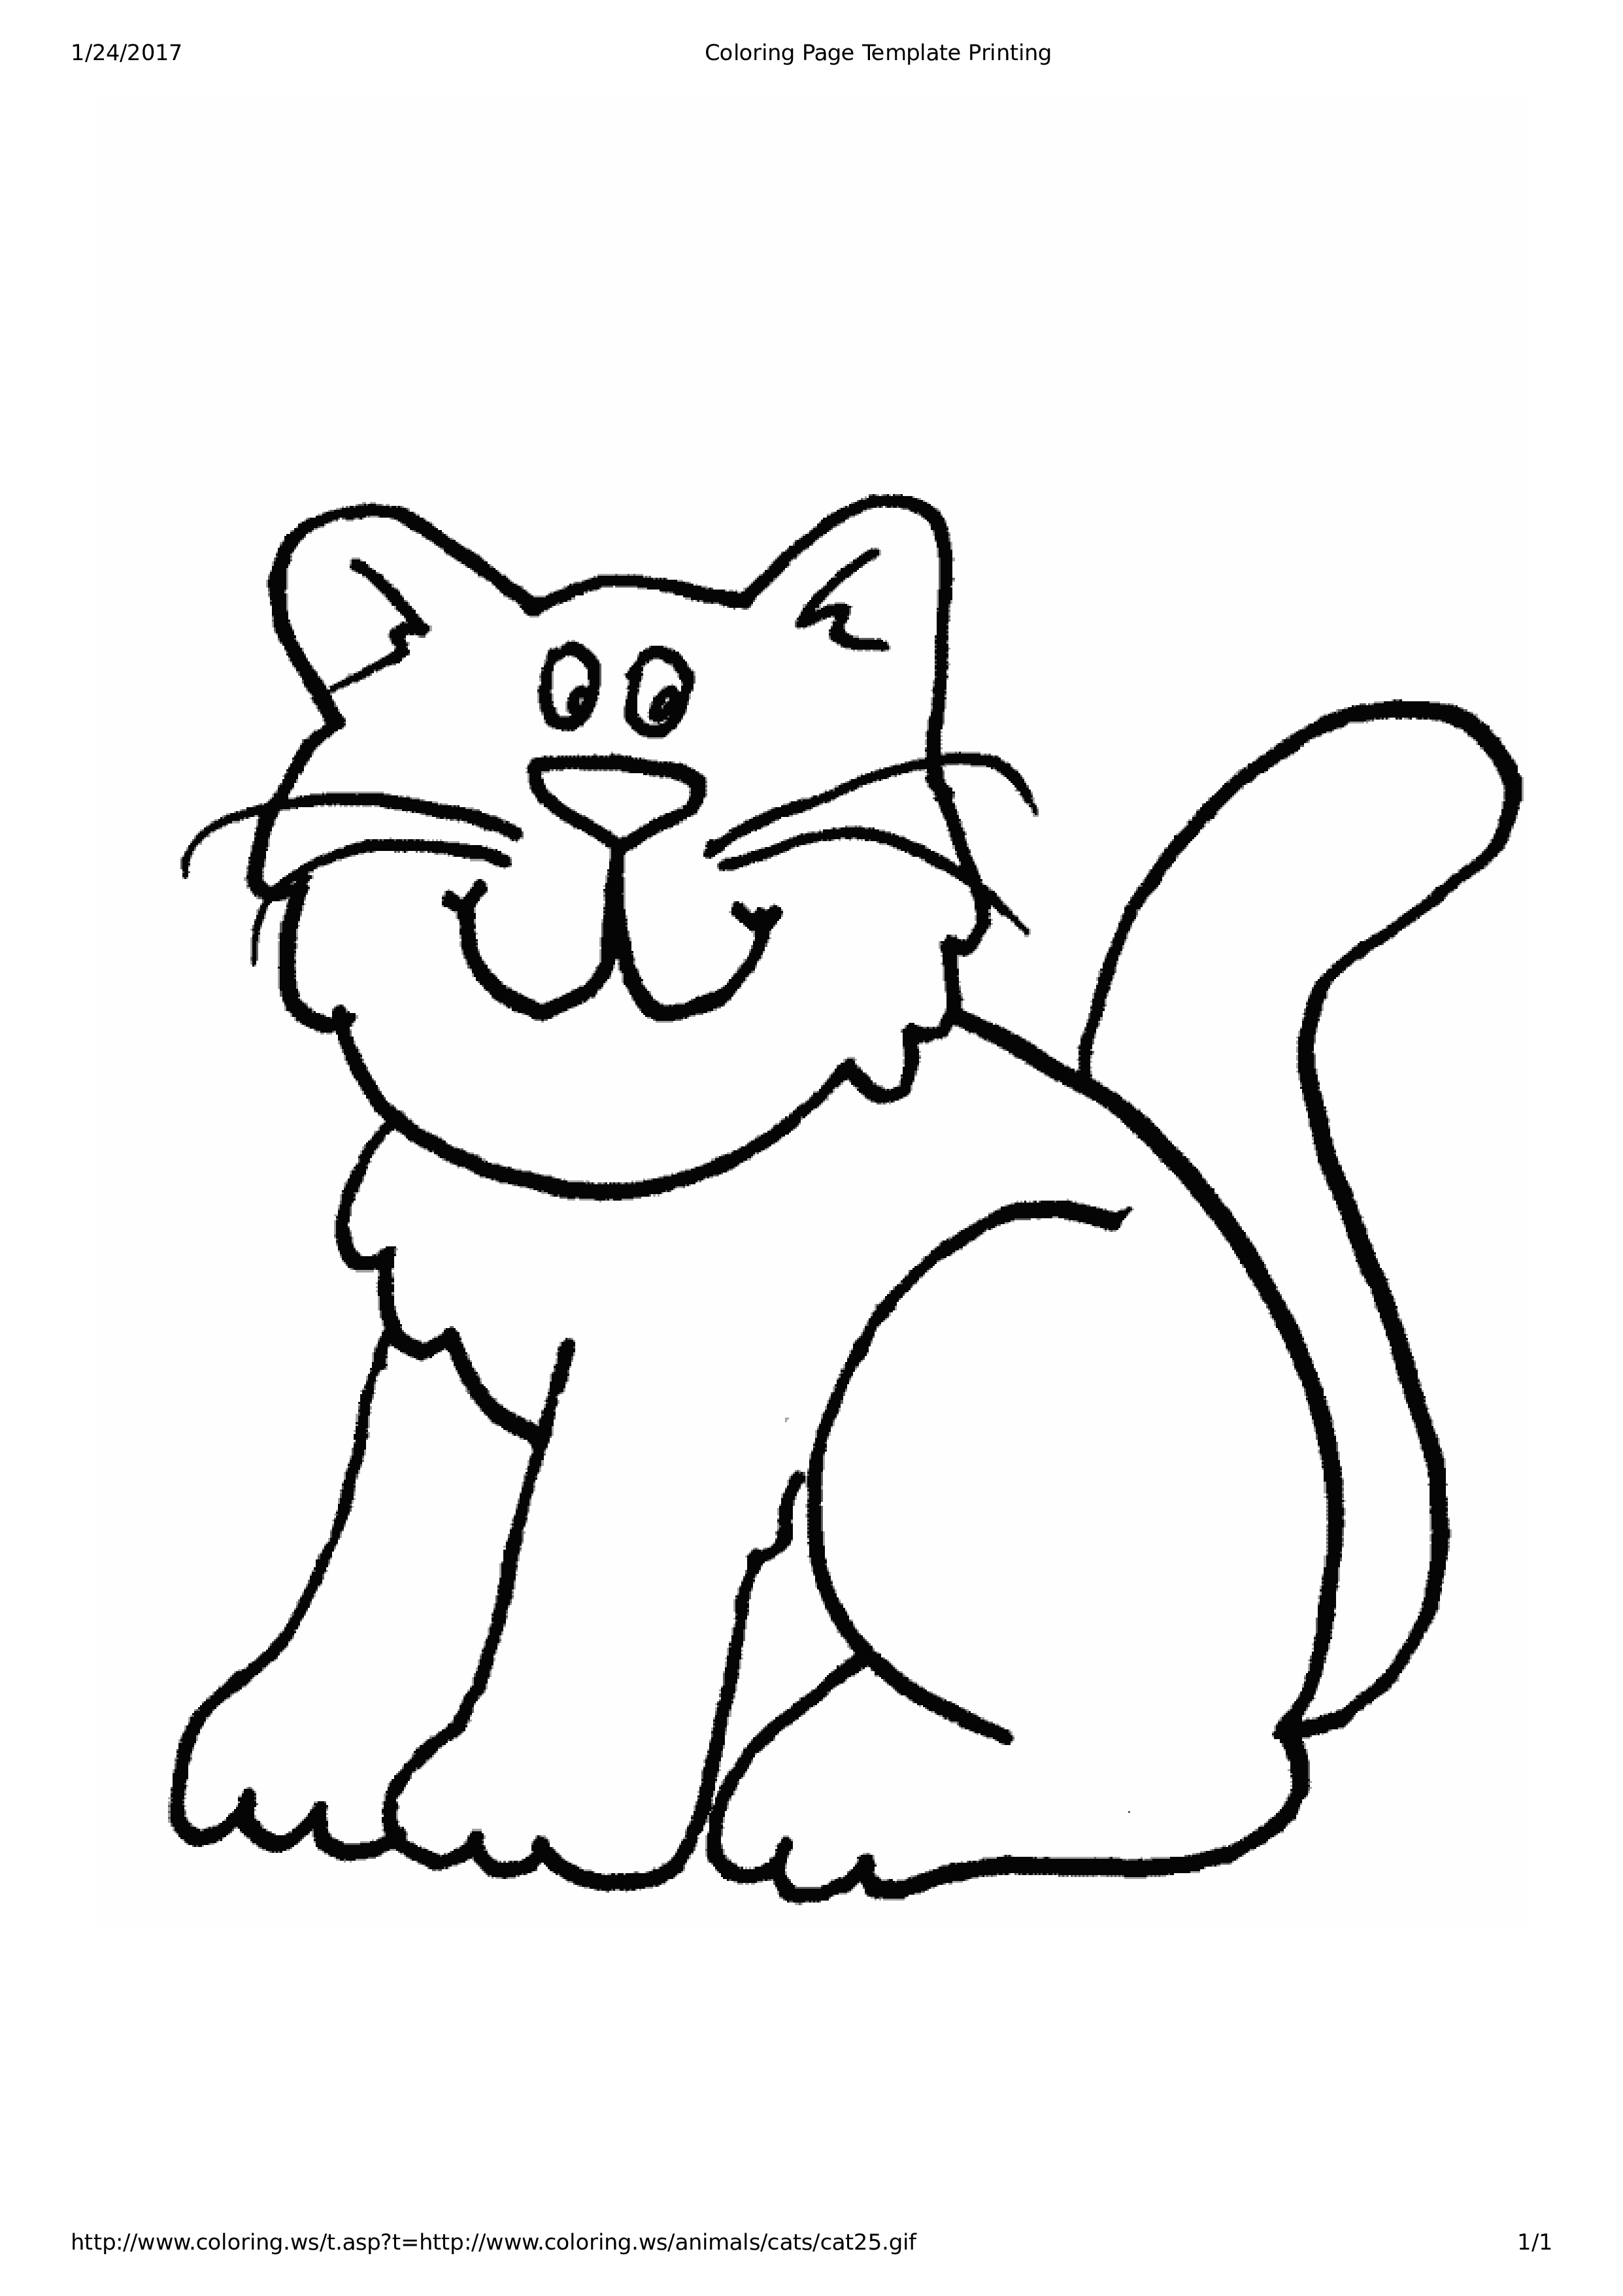 Cat Coloring Page For Kid's | Templates at allbusinesstemplates.com